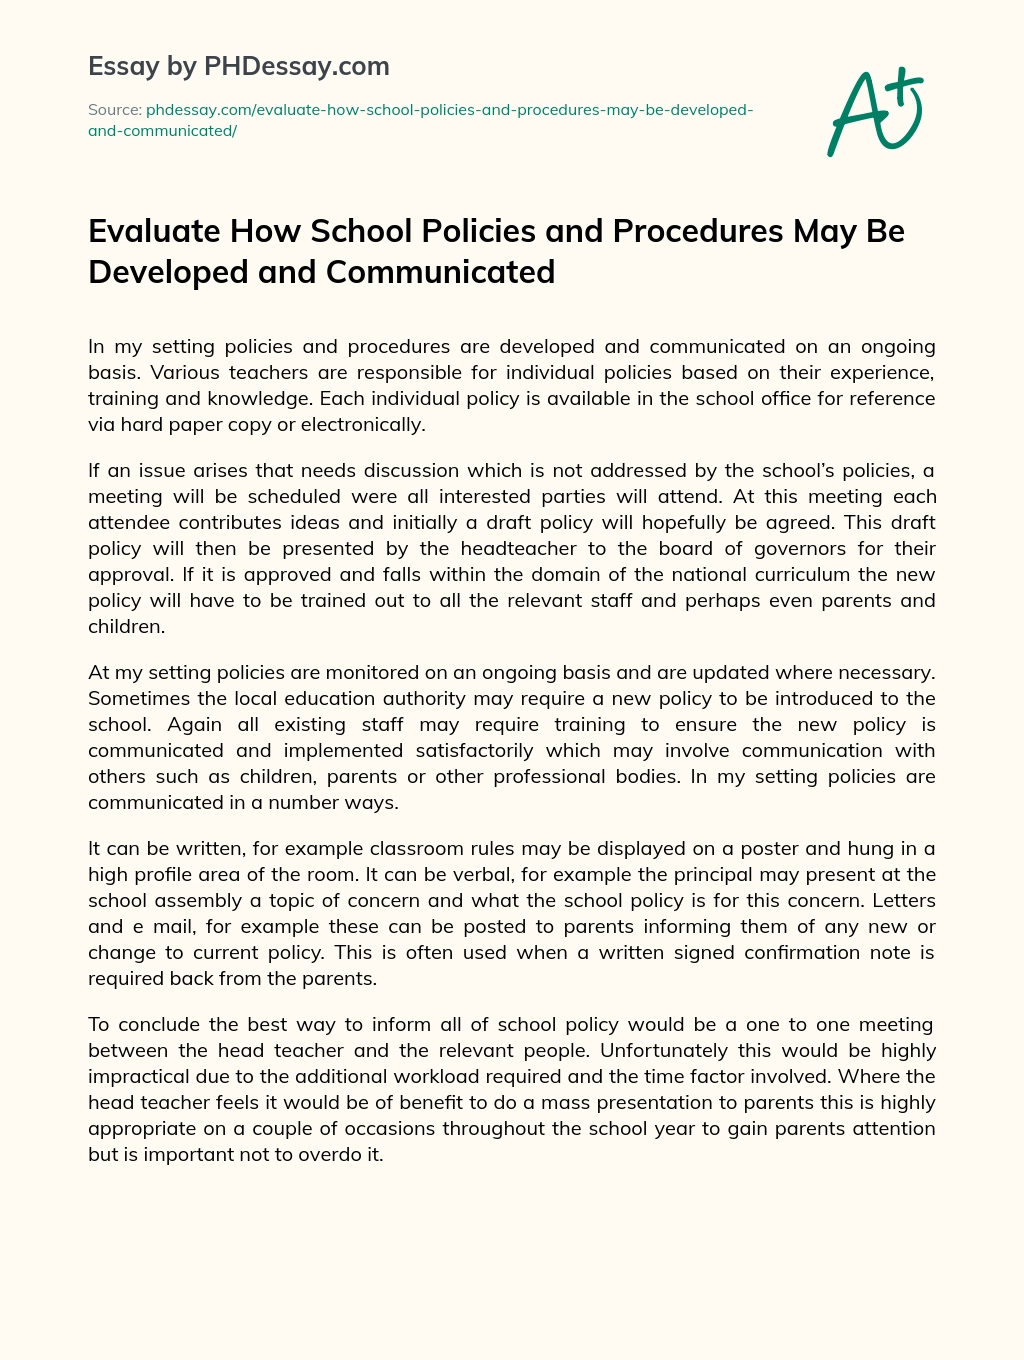 Evaluate How School Policies and Procedures May Be Developed and Communicated essay